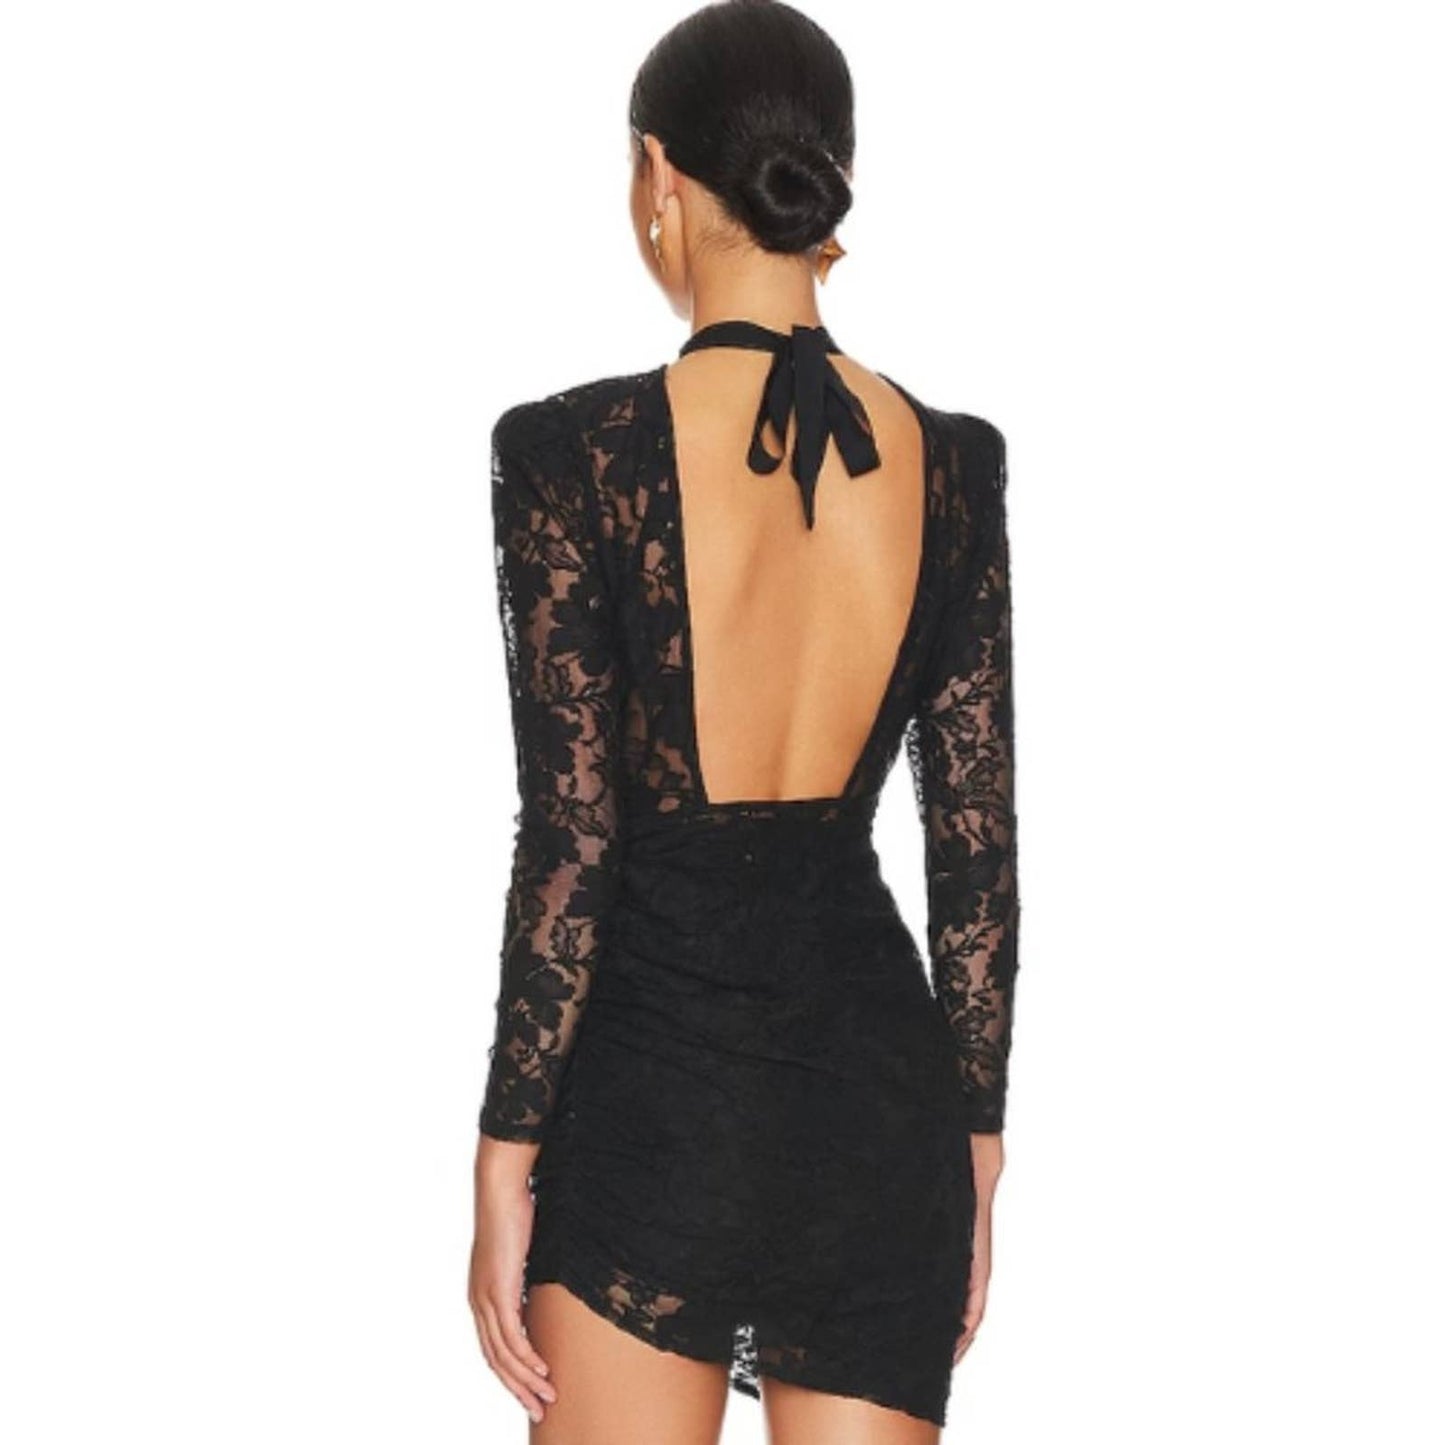 Lovers and Friends Turner Mini Dress in Black Lace NWT Size Small